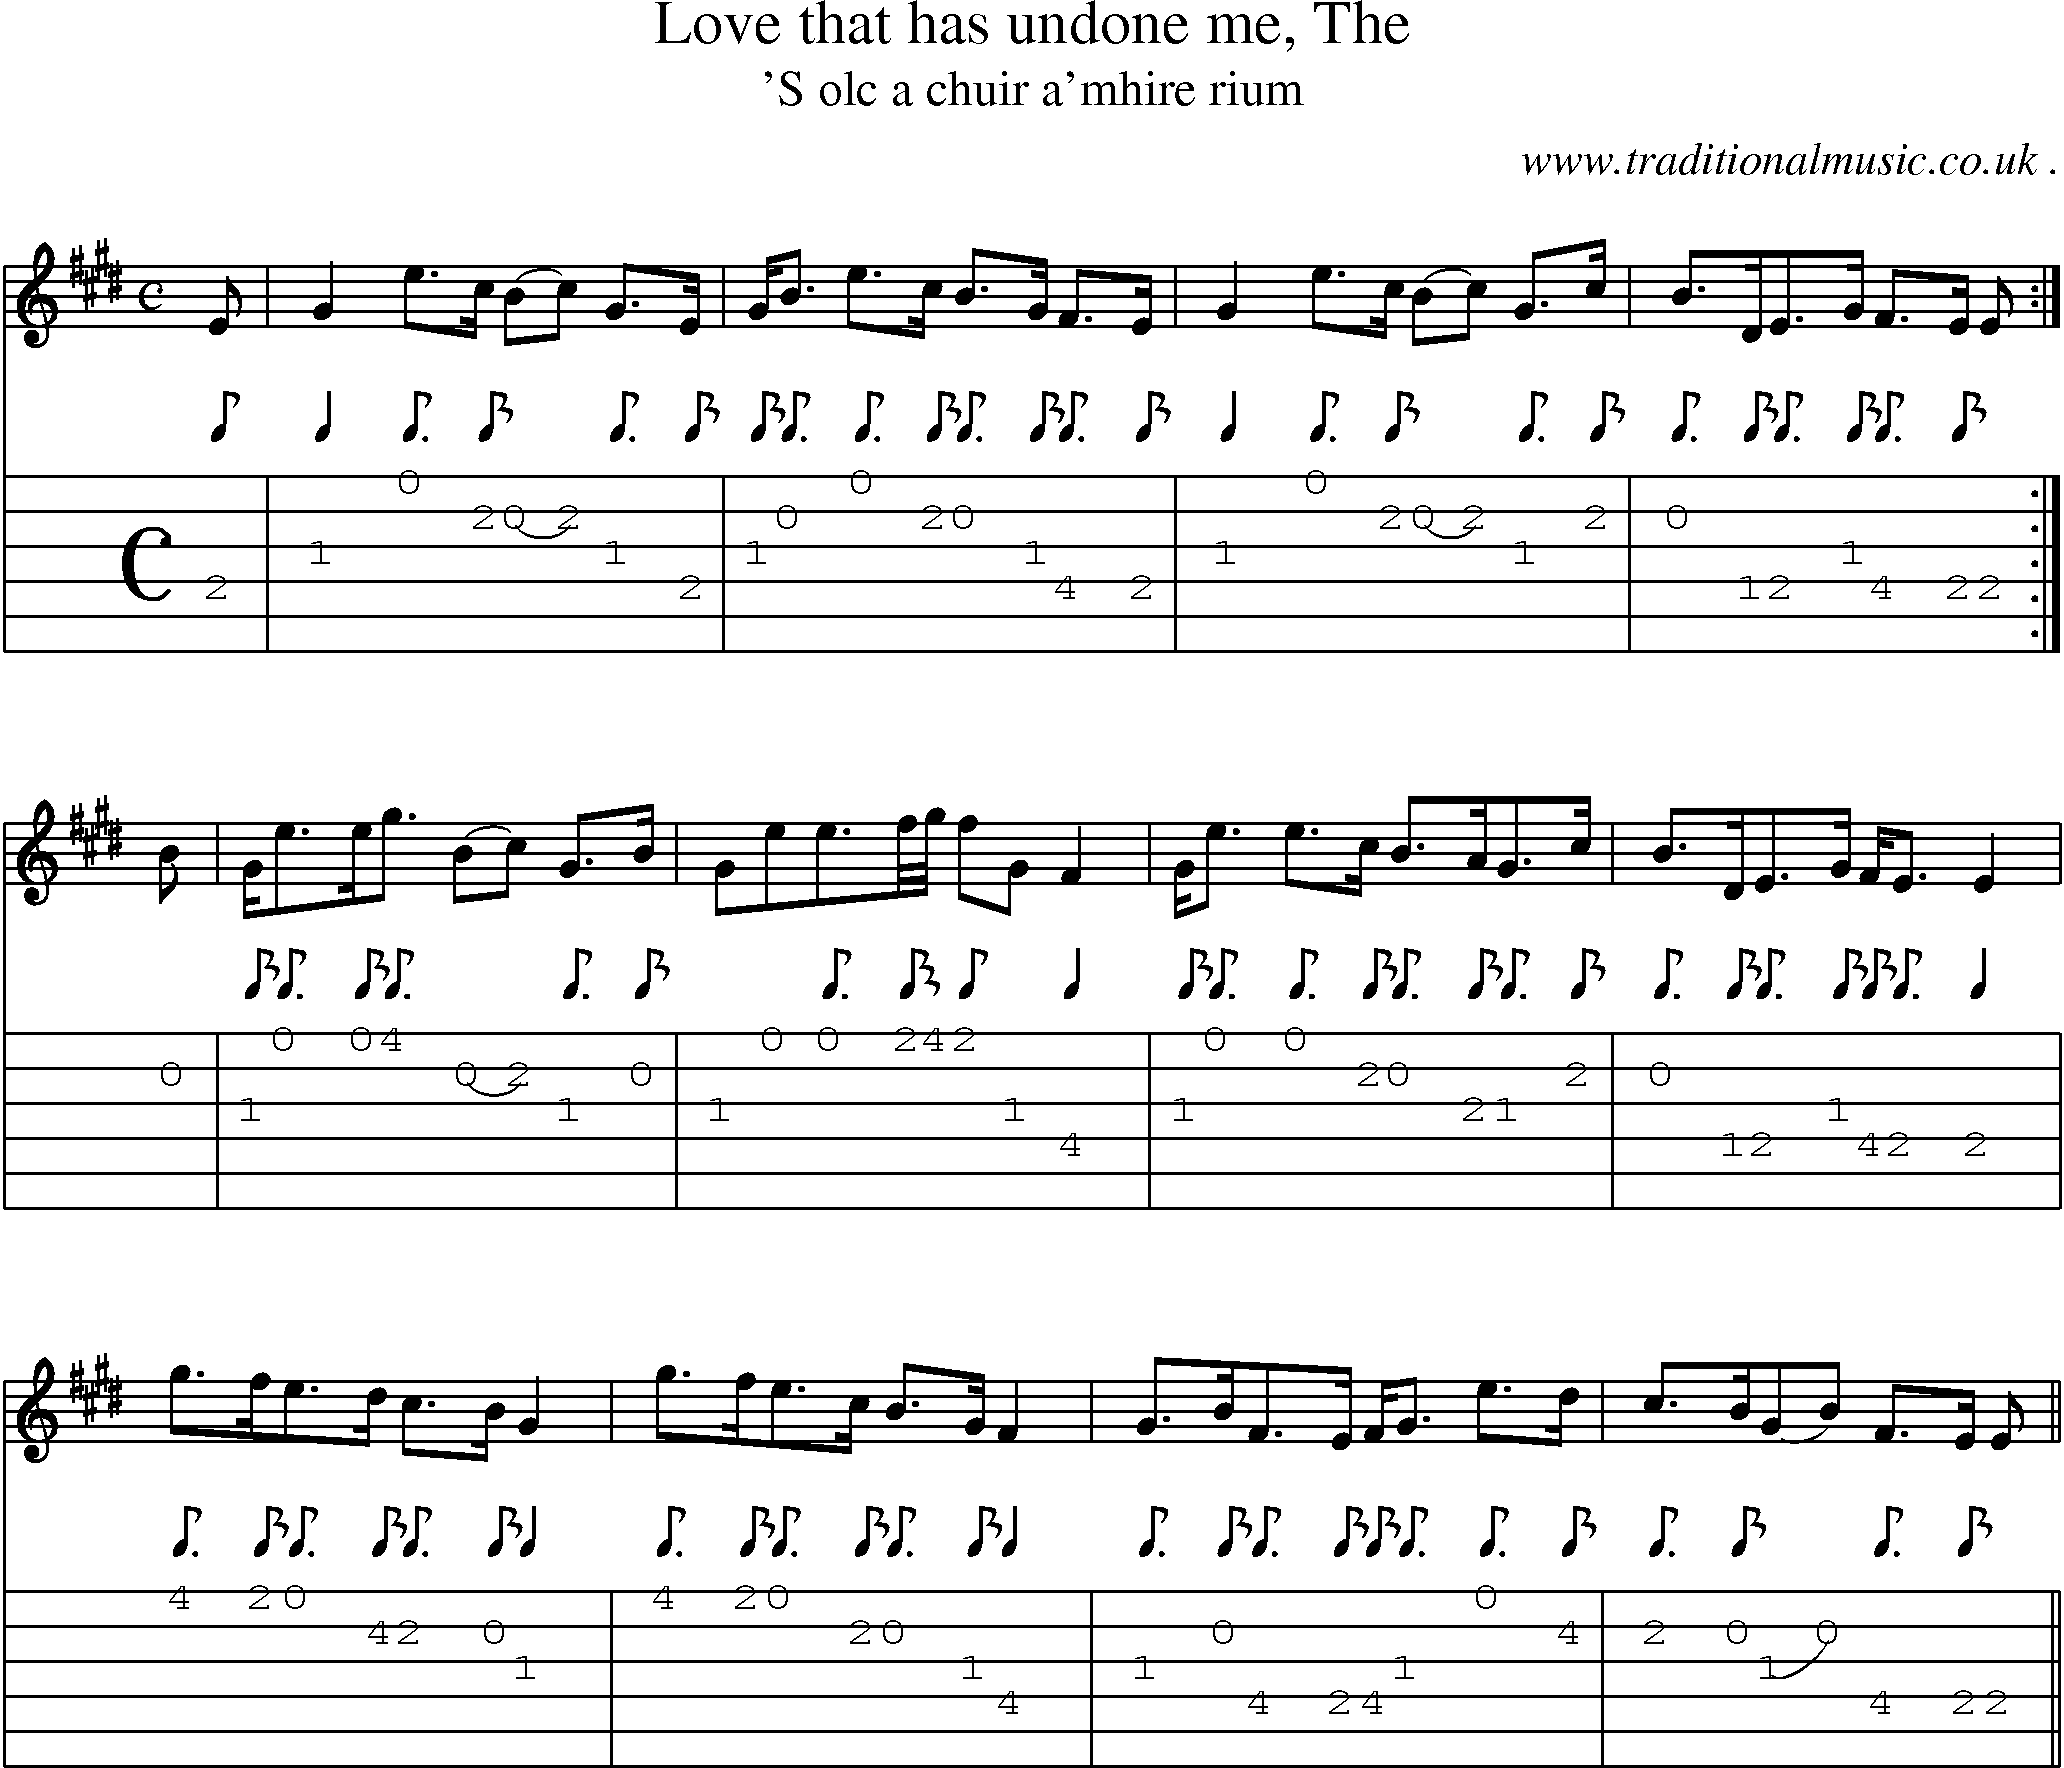 Sheet-music  score, Chords and Guitar Tabs for Love That Has Undone Me The